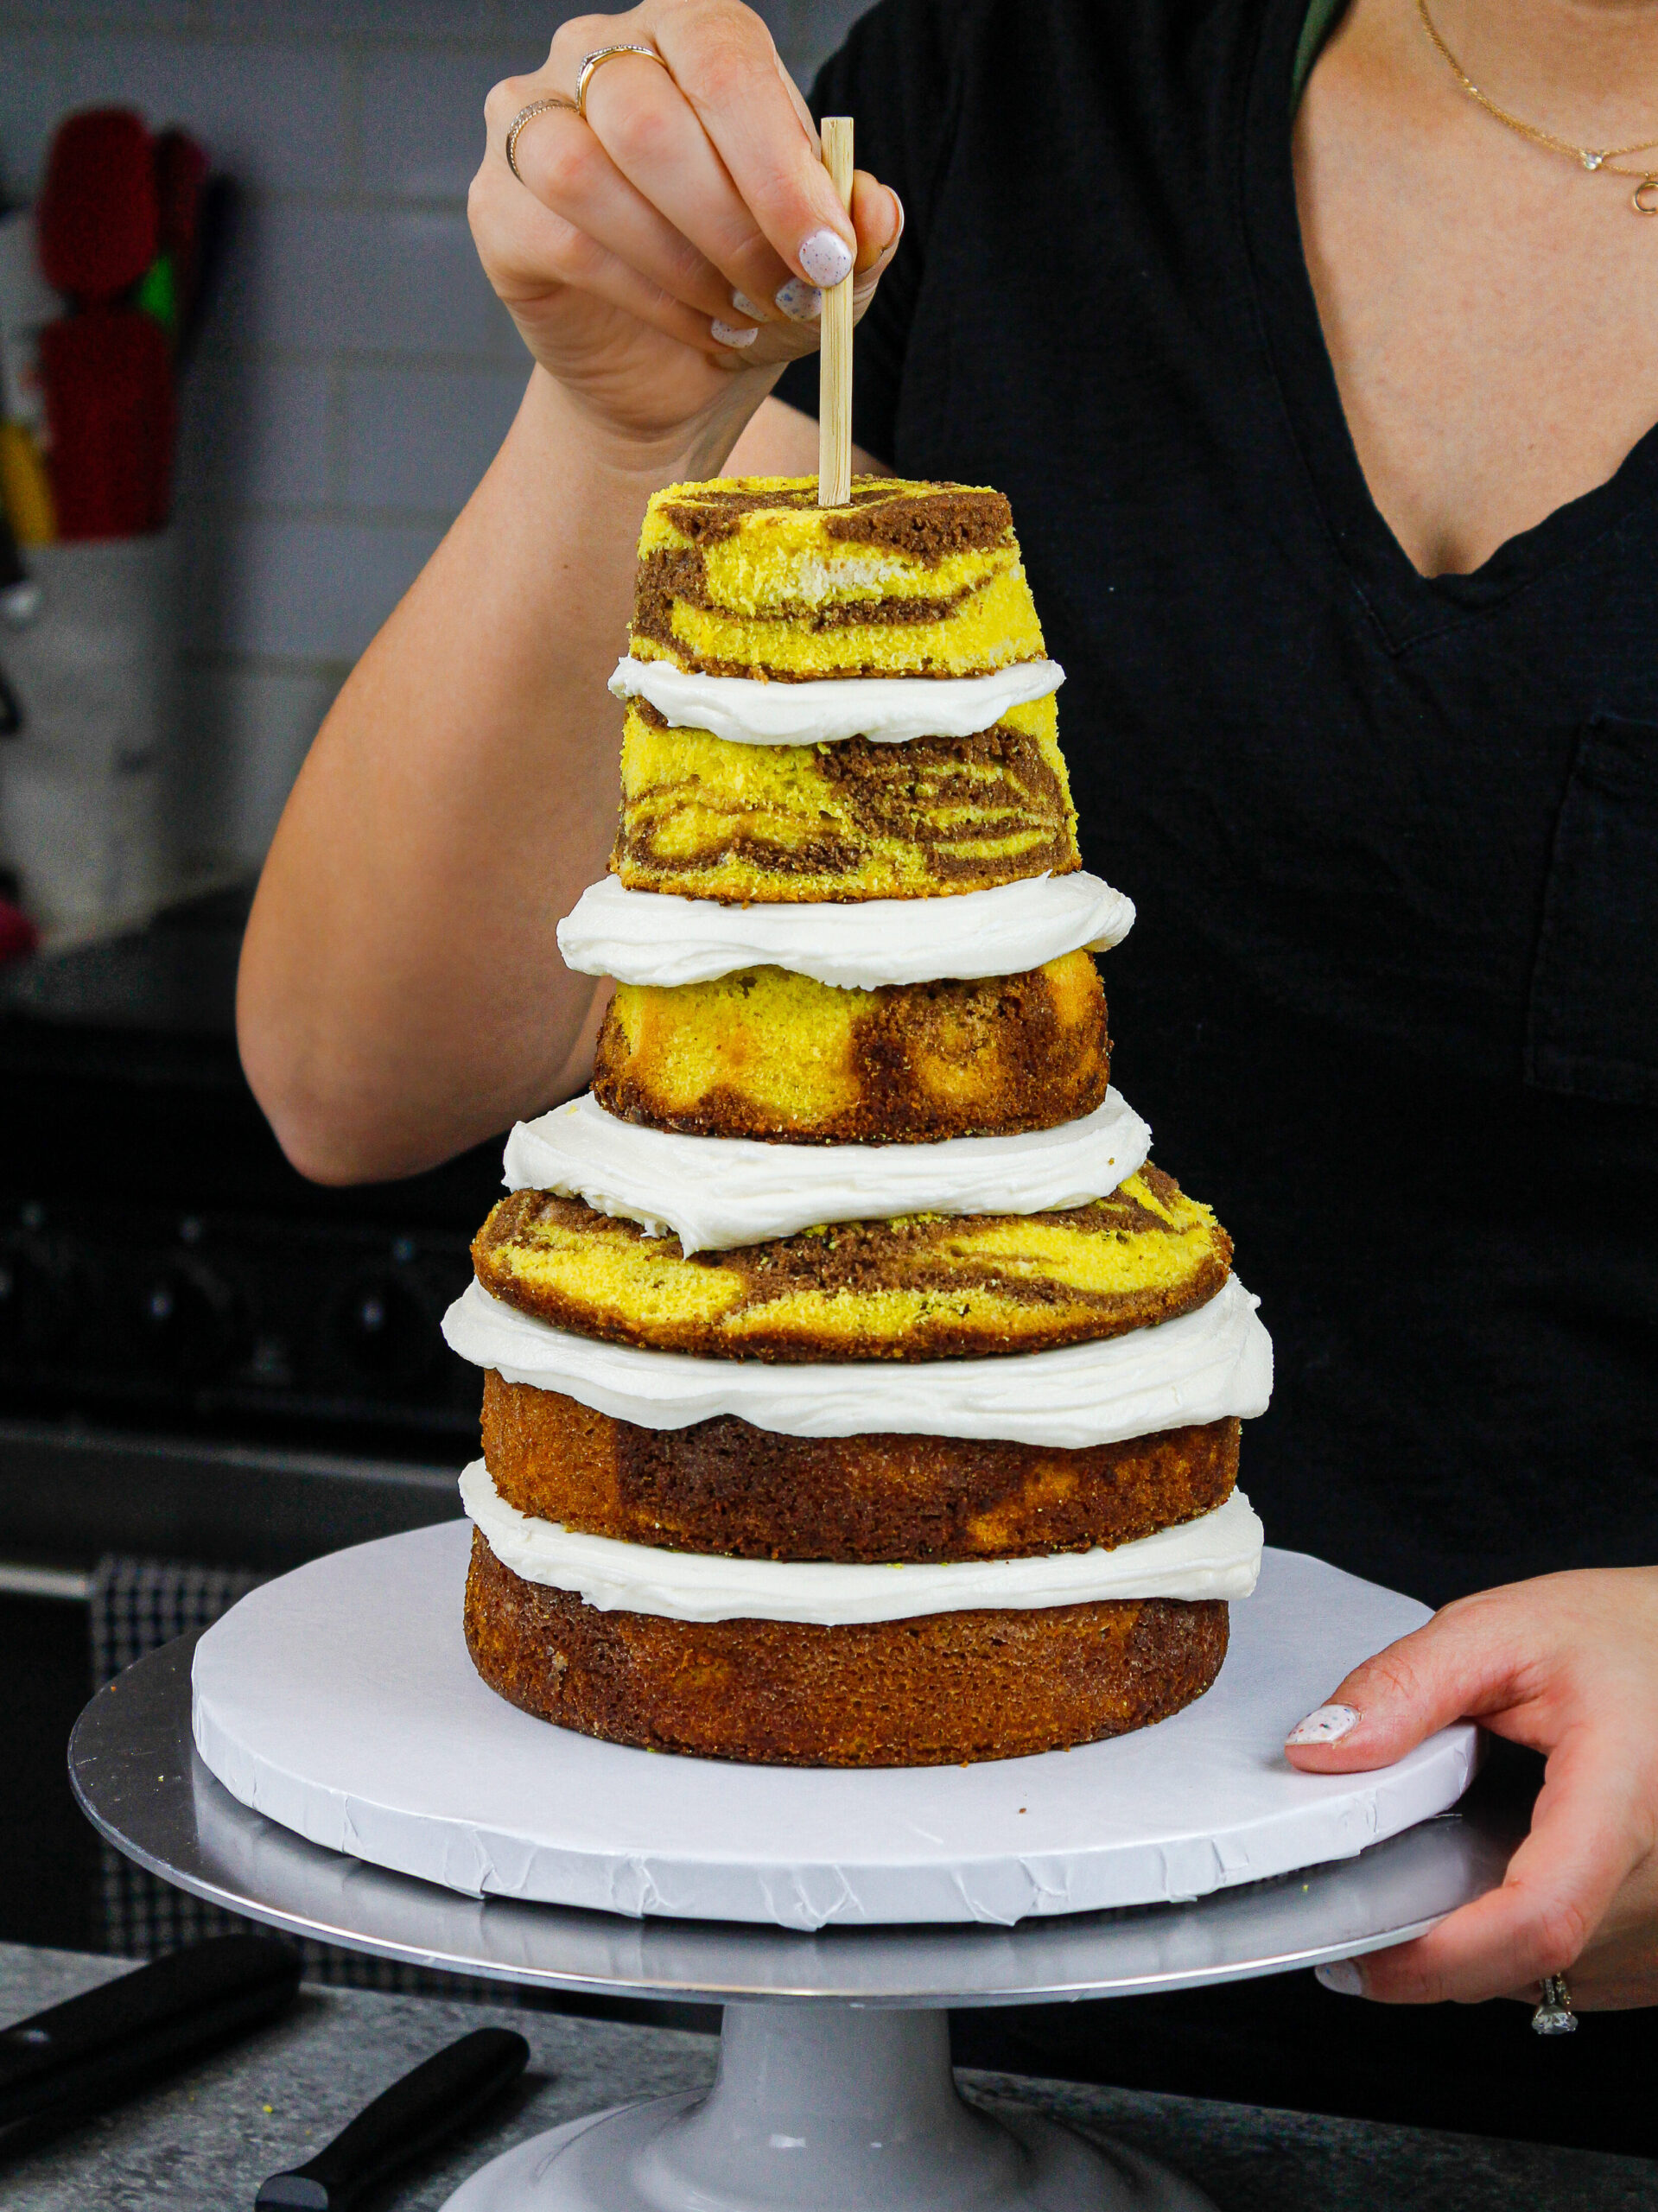 image of yellow marble cake layers that have been stacked and trimmed to make a giraffe cake